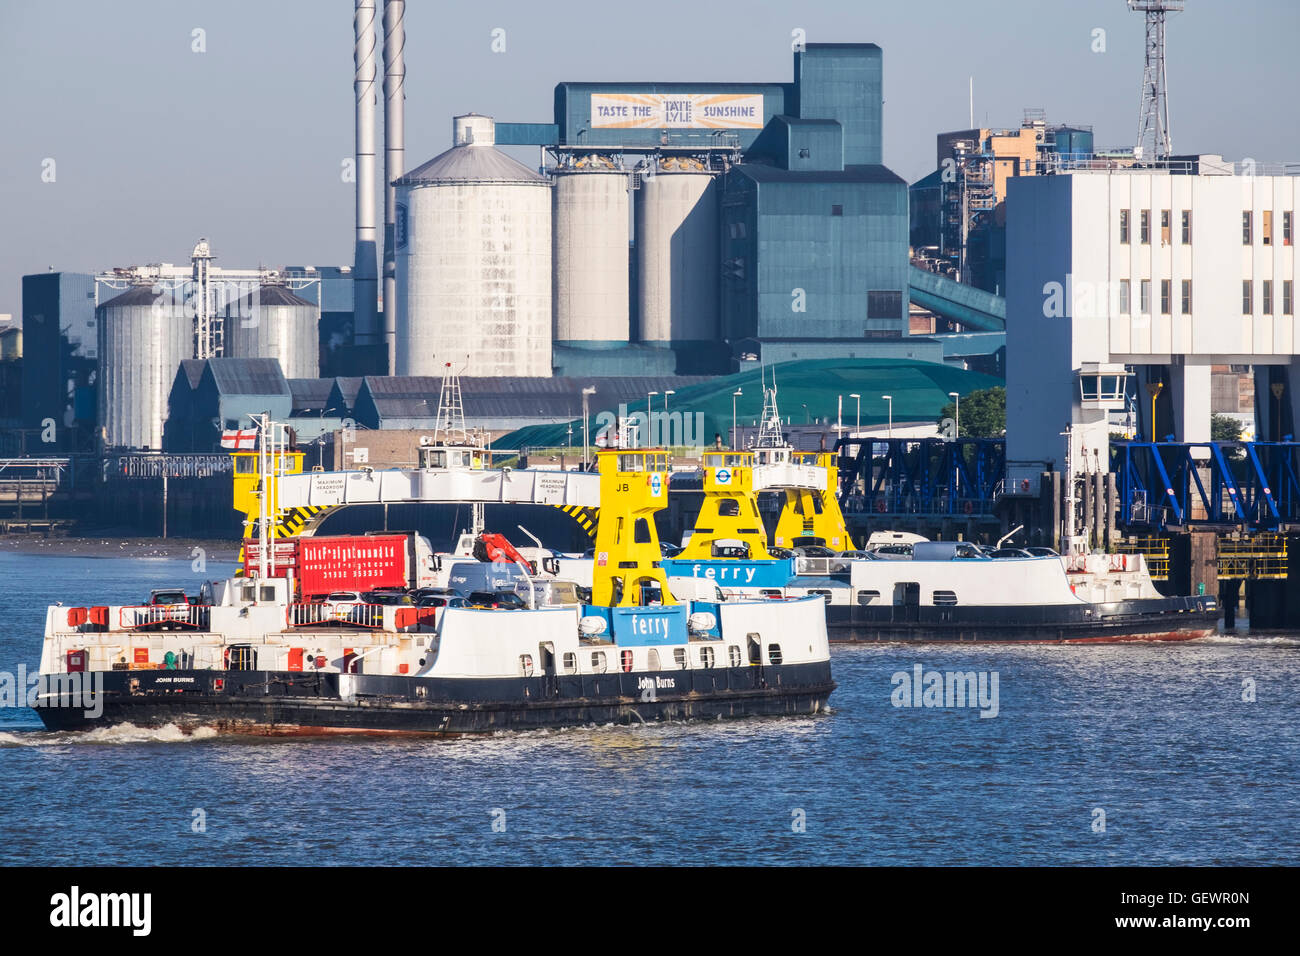 Woolwich Ferry, Tamise, Londres, Angleterre, Royaume-Uni Banque D'Images